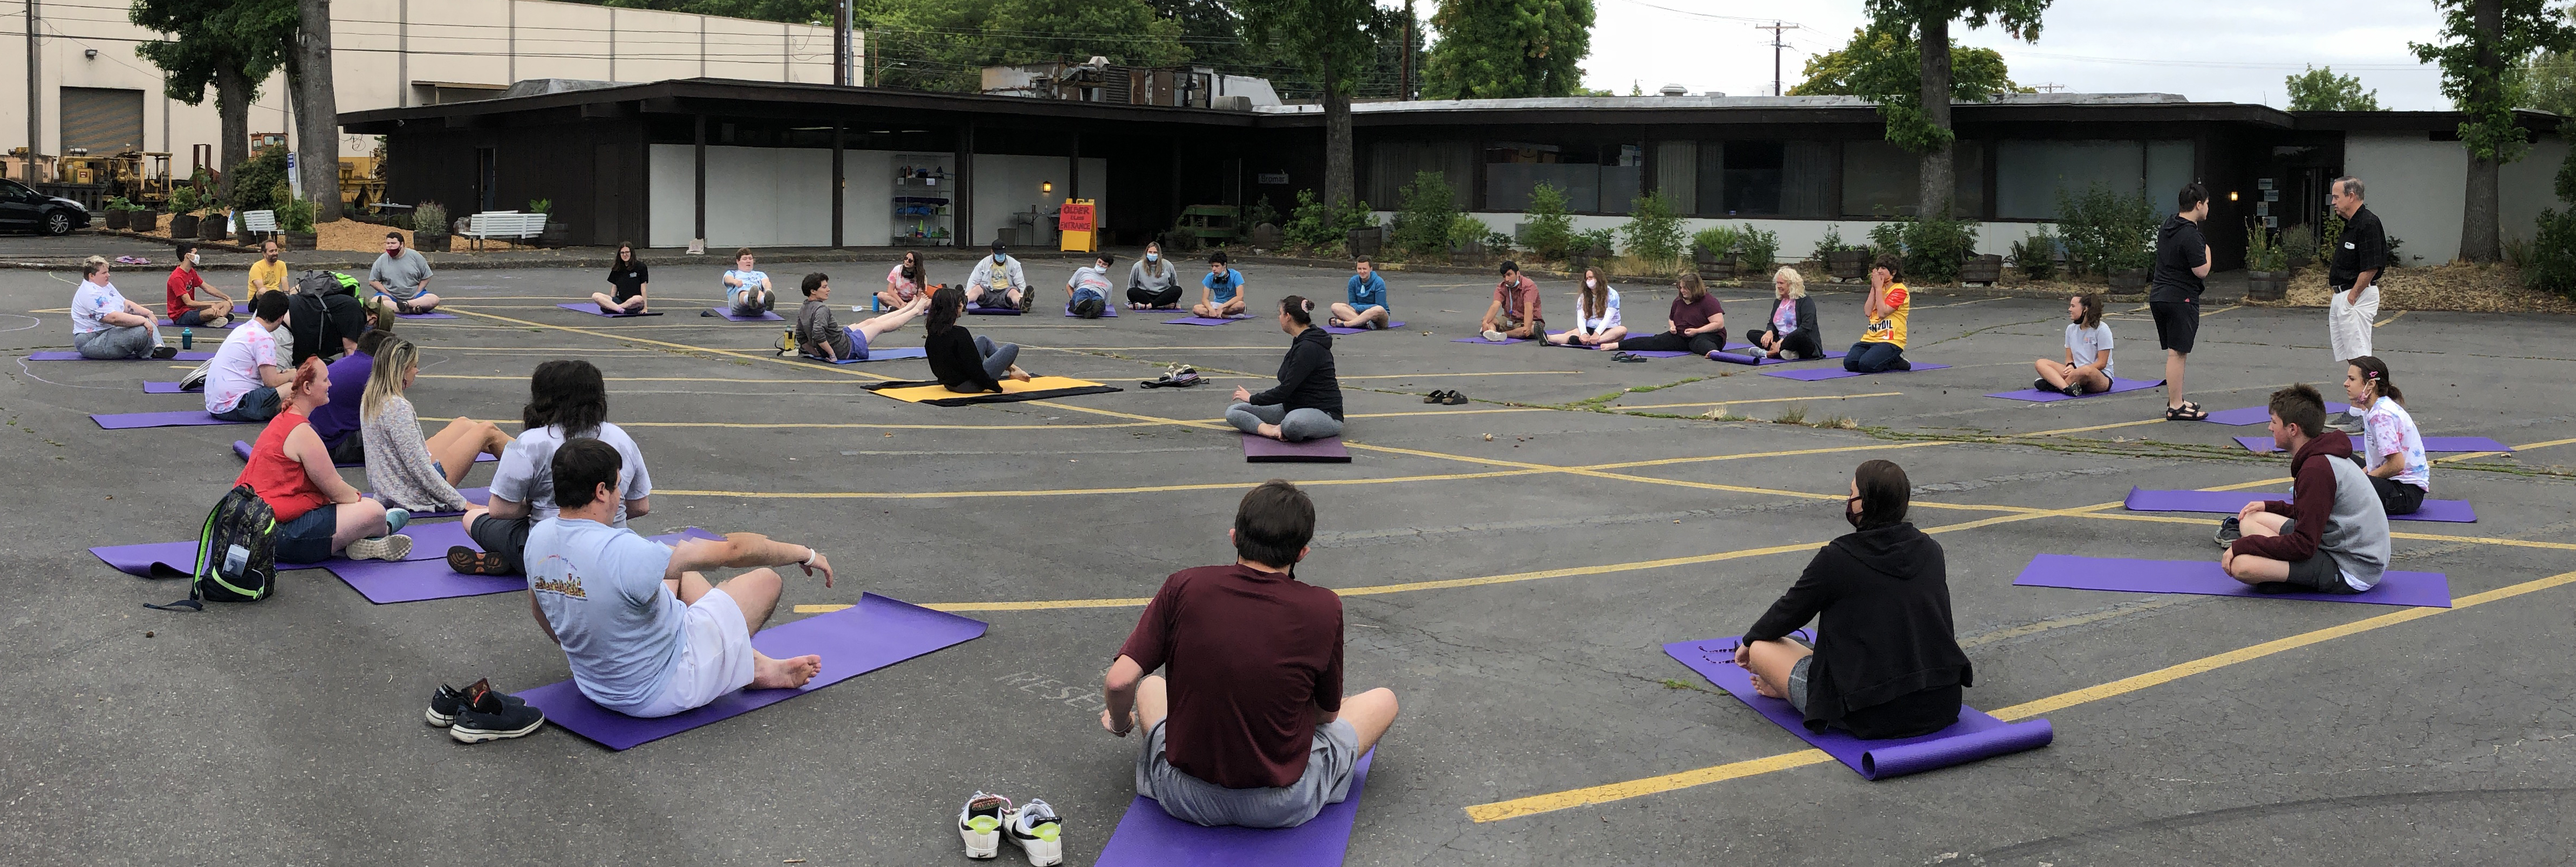 Campers sitting on yoga mats in the ACAP parking lot.